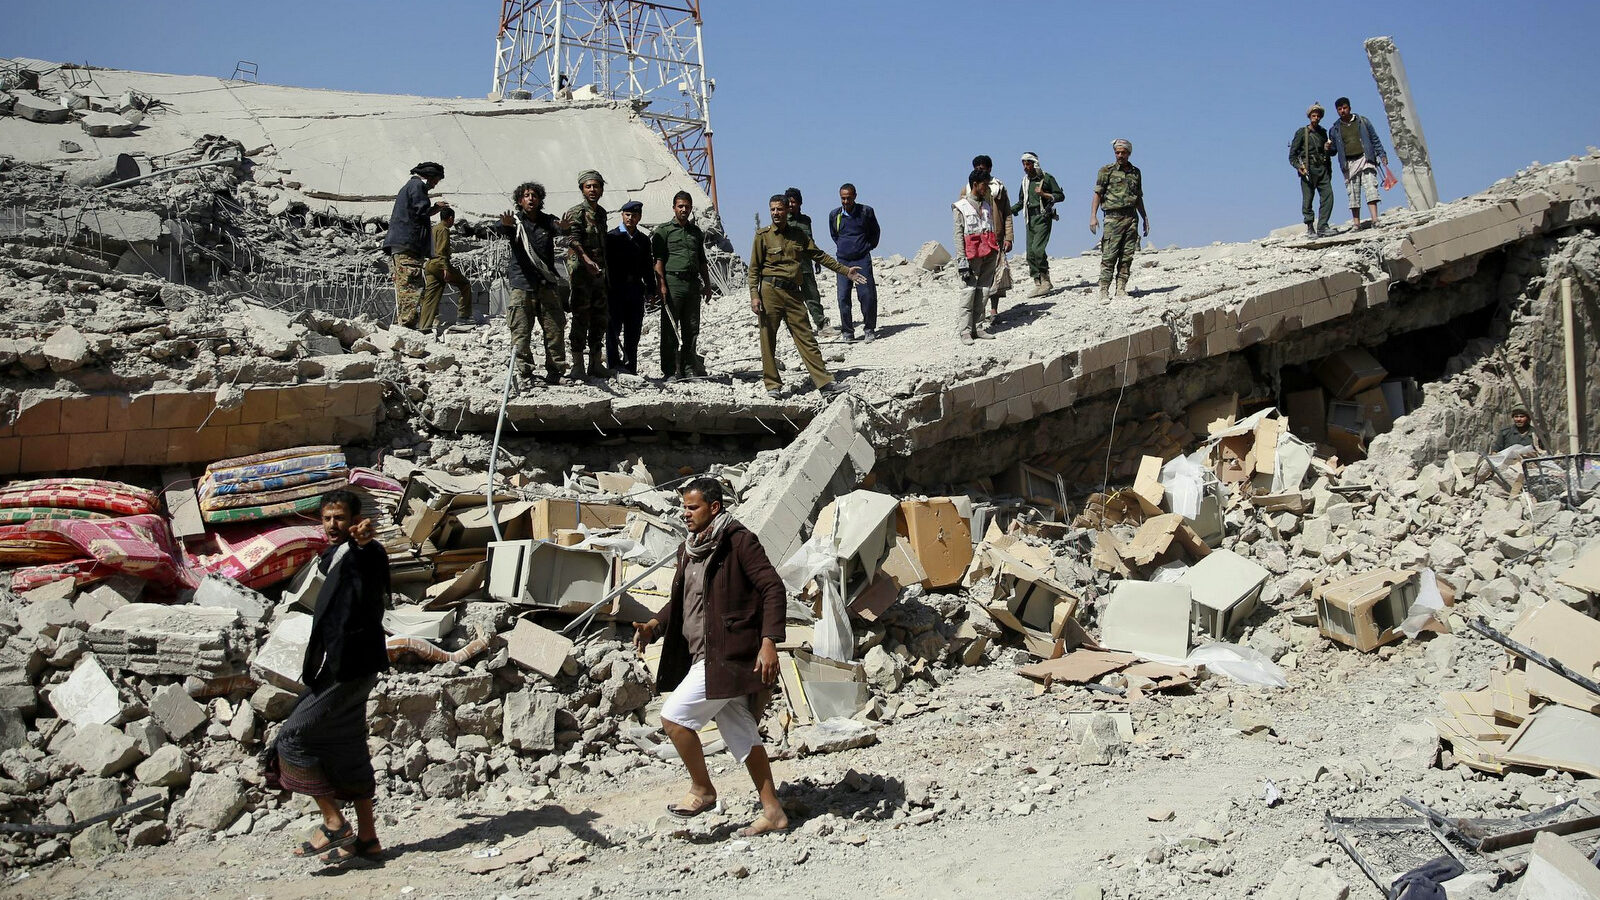 Policemen stand on the rubble of the police headquarters after it was destroyed by Saudi-led airstrikes in Sanaa, Yemen, Monday, Jan. 18, 2016. (AP Photo/Hani Mohammed)